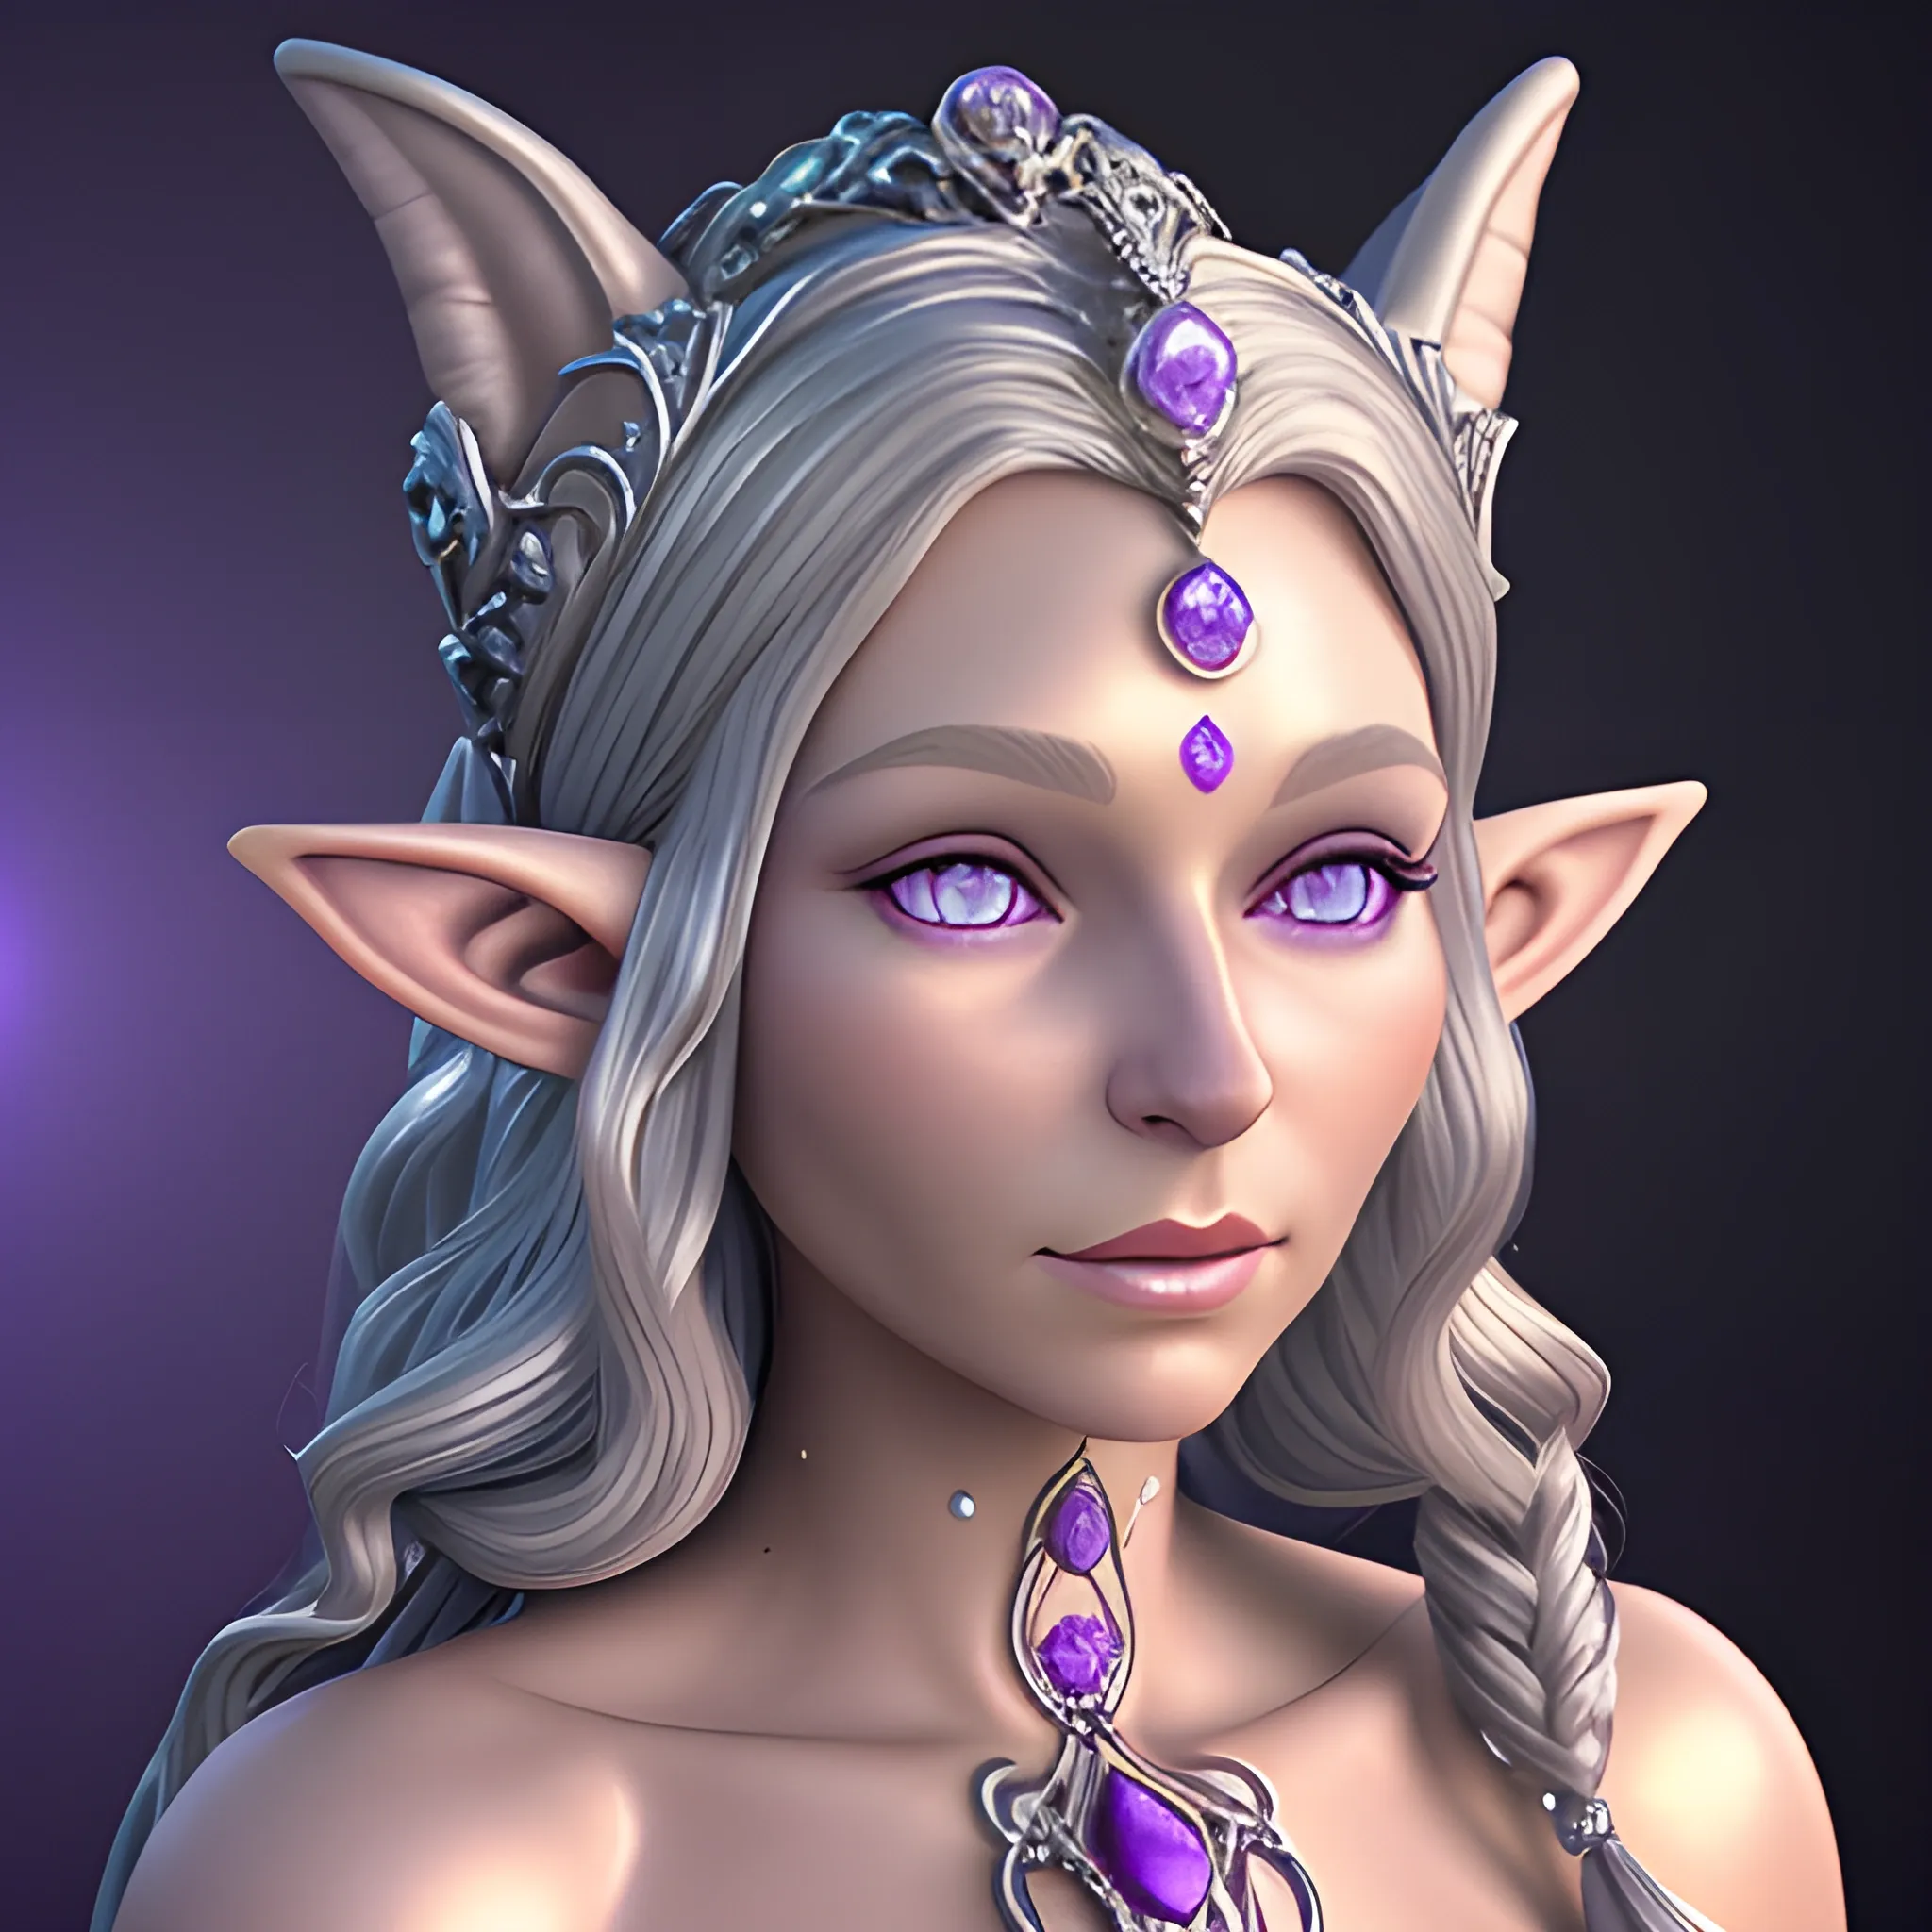 fantasy slightly older female elf with long curling silver hair and purple eyes. Jeweled ears and body. Dewy skin, soft features. Queen bejeweled portrait 
, 3D